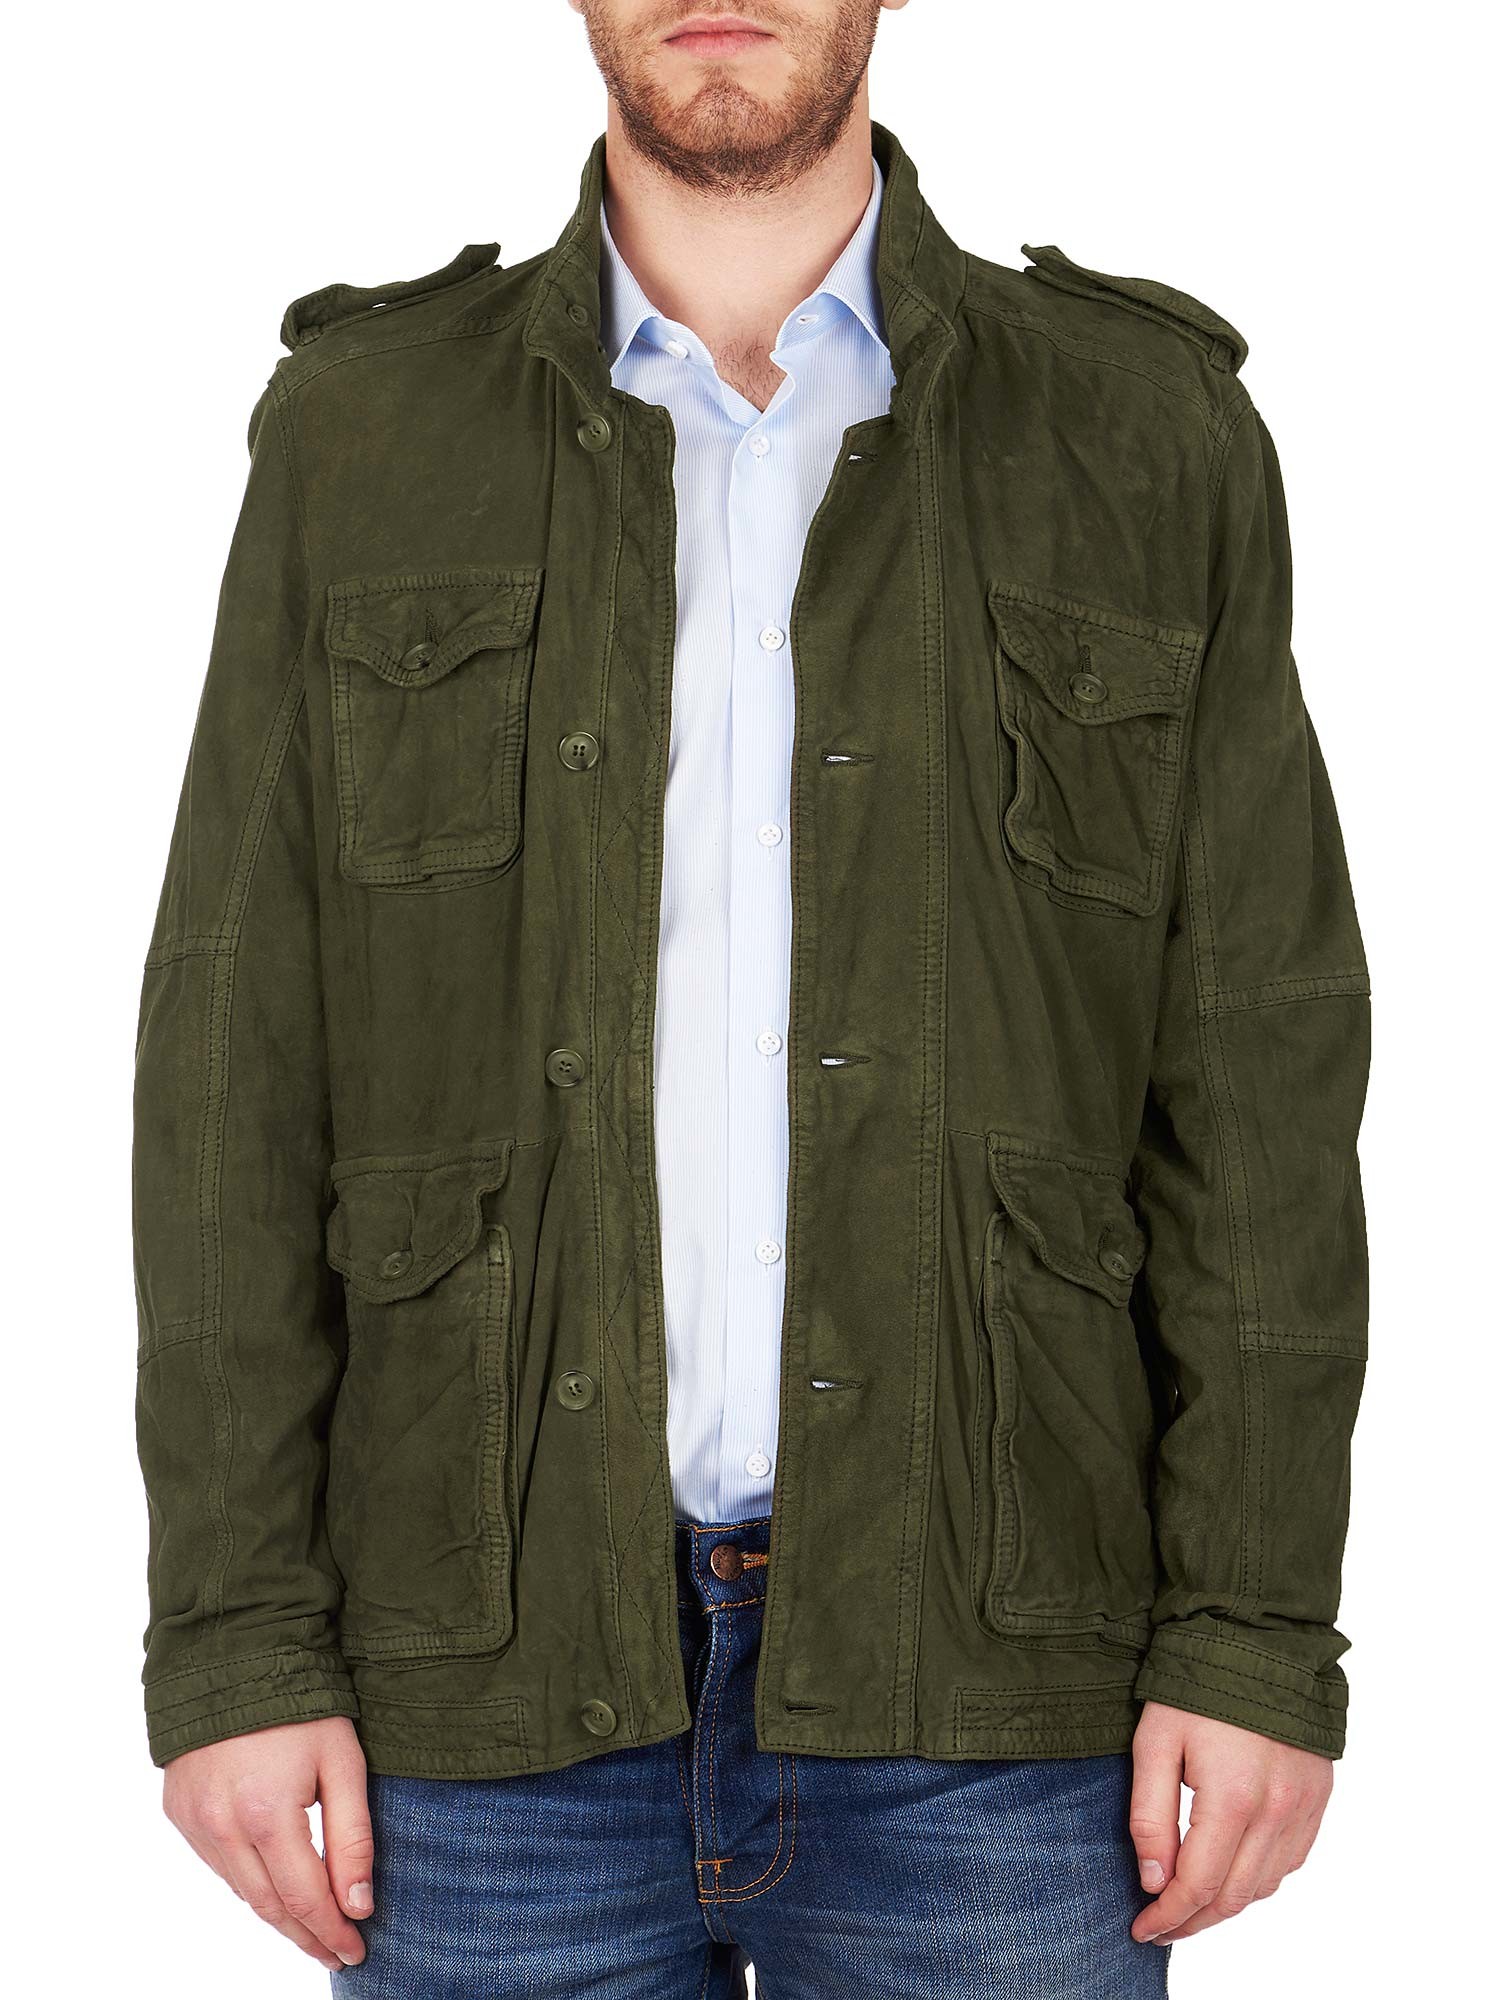 Andrea D'Amico - Green field jacket in washed suede